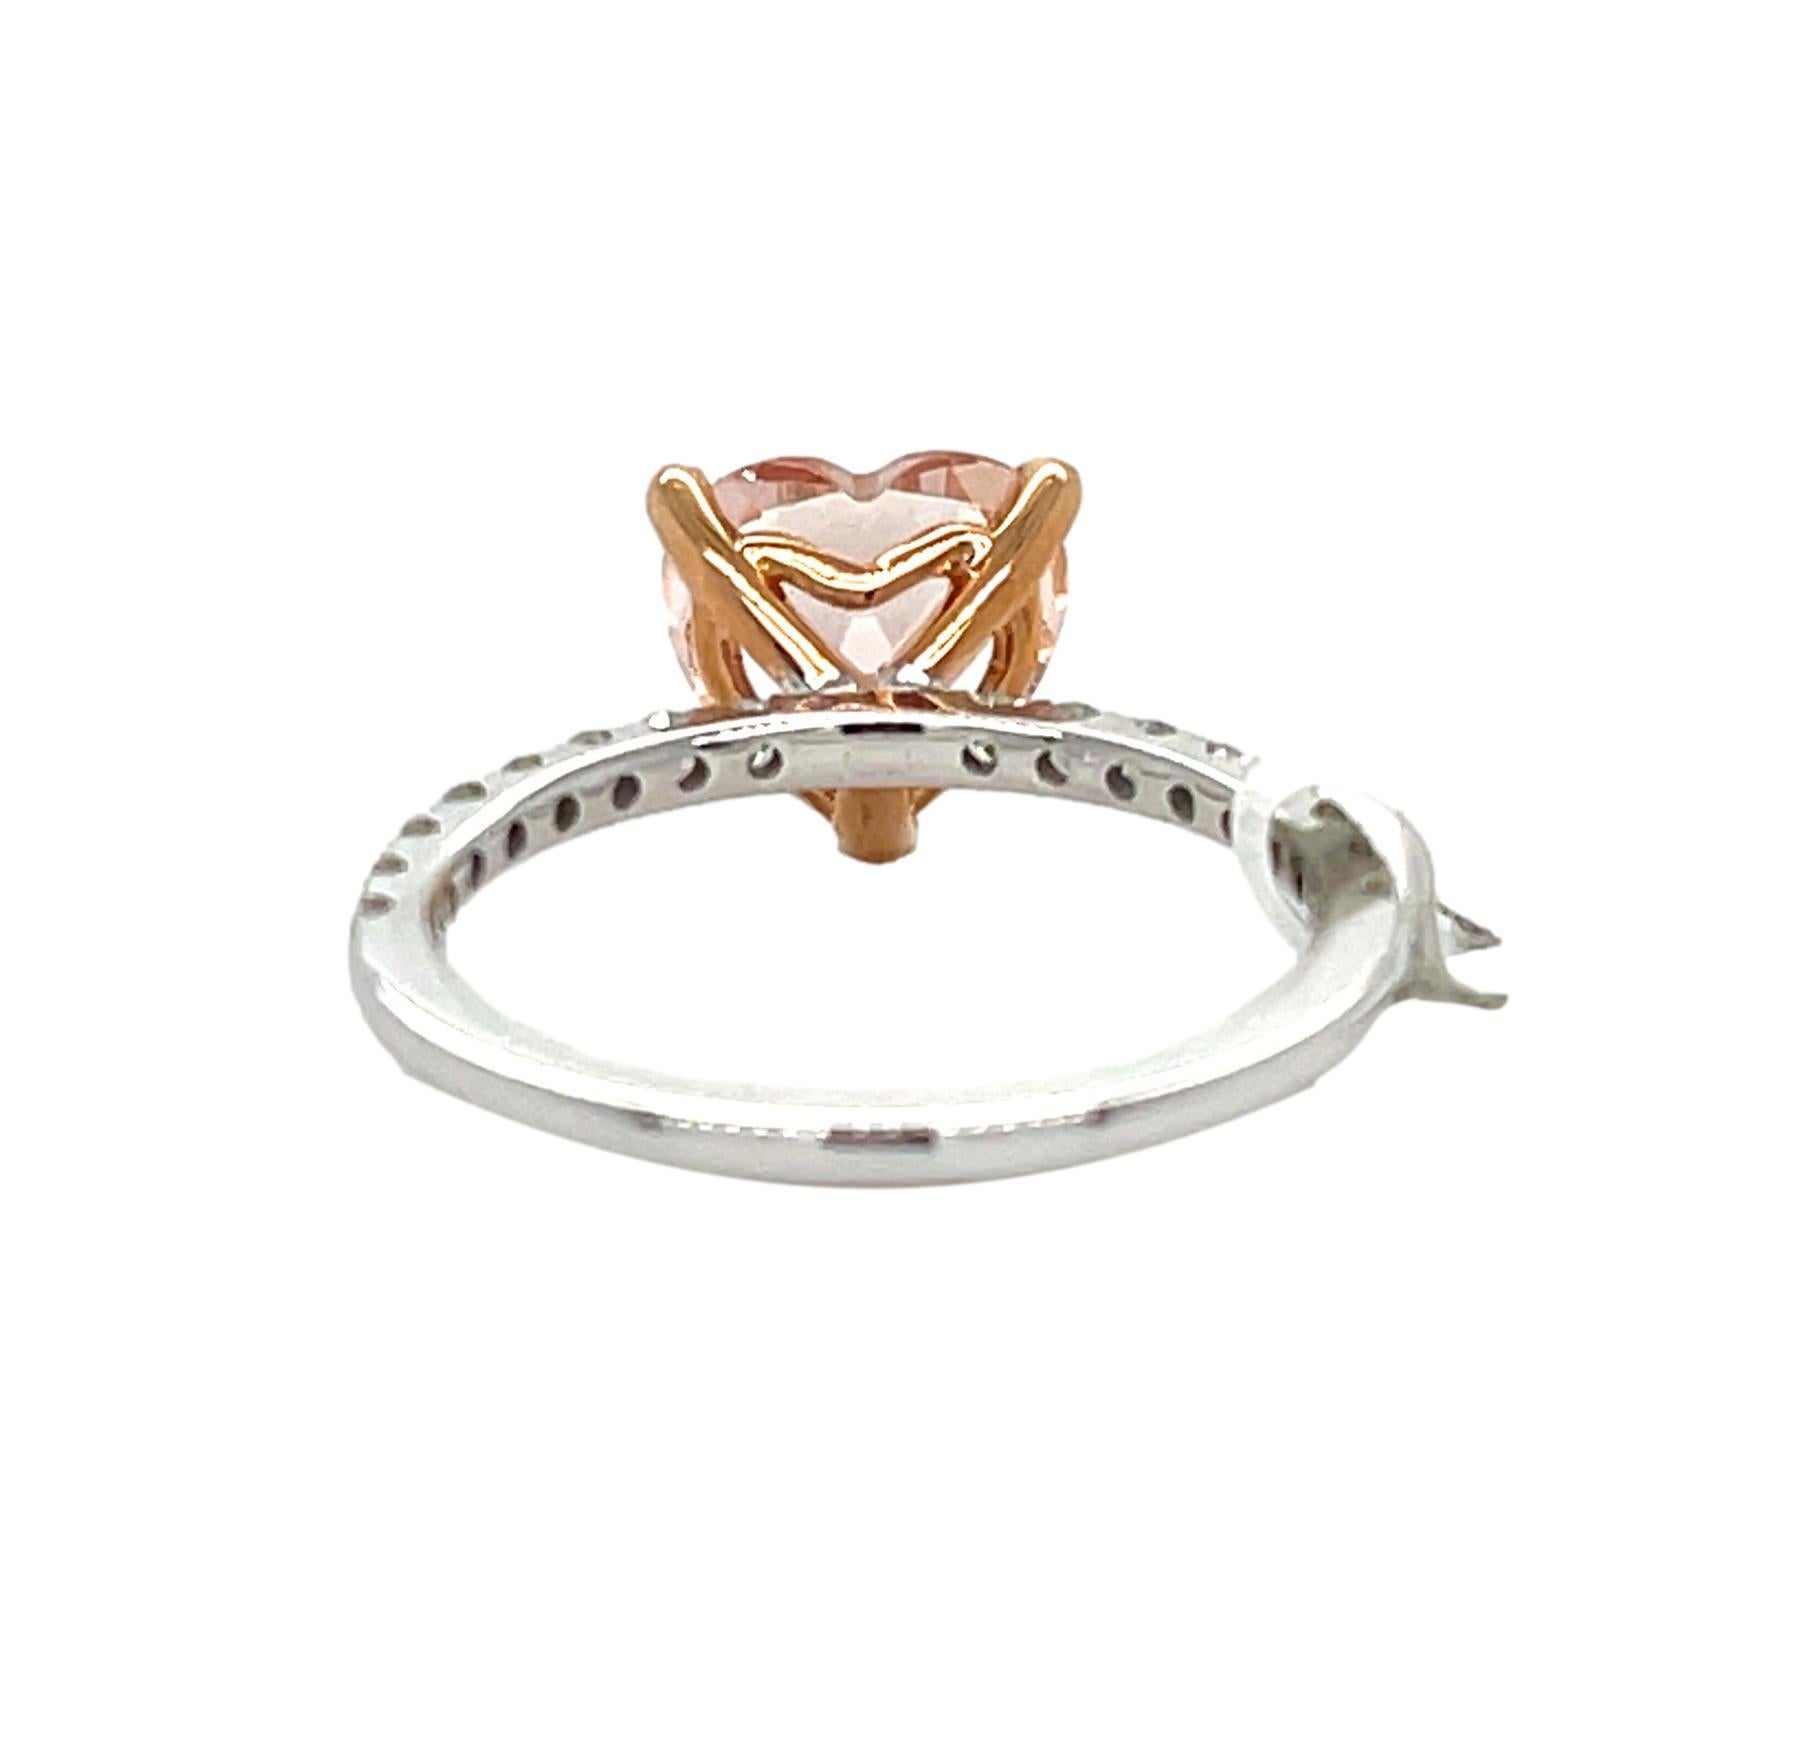 This stunning ring has a 9.5 mm heart shape Morganite center which is 3 prong set in 14 White gold with Rose gold prongs. This ring has a straight shank with shimmering diamonds on it for a perfect accent all set in 14 kt White gold. This ring will